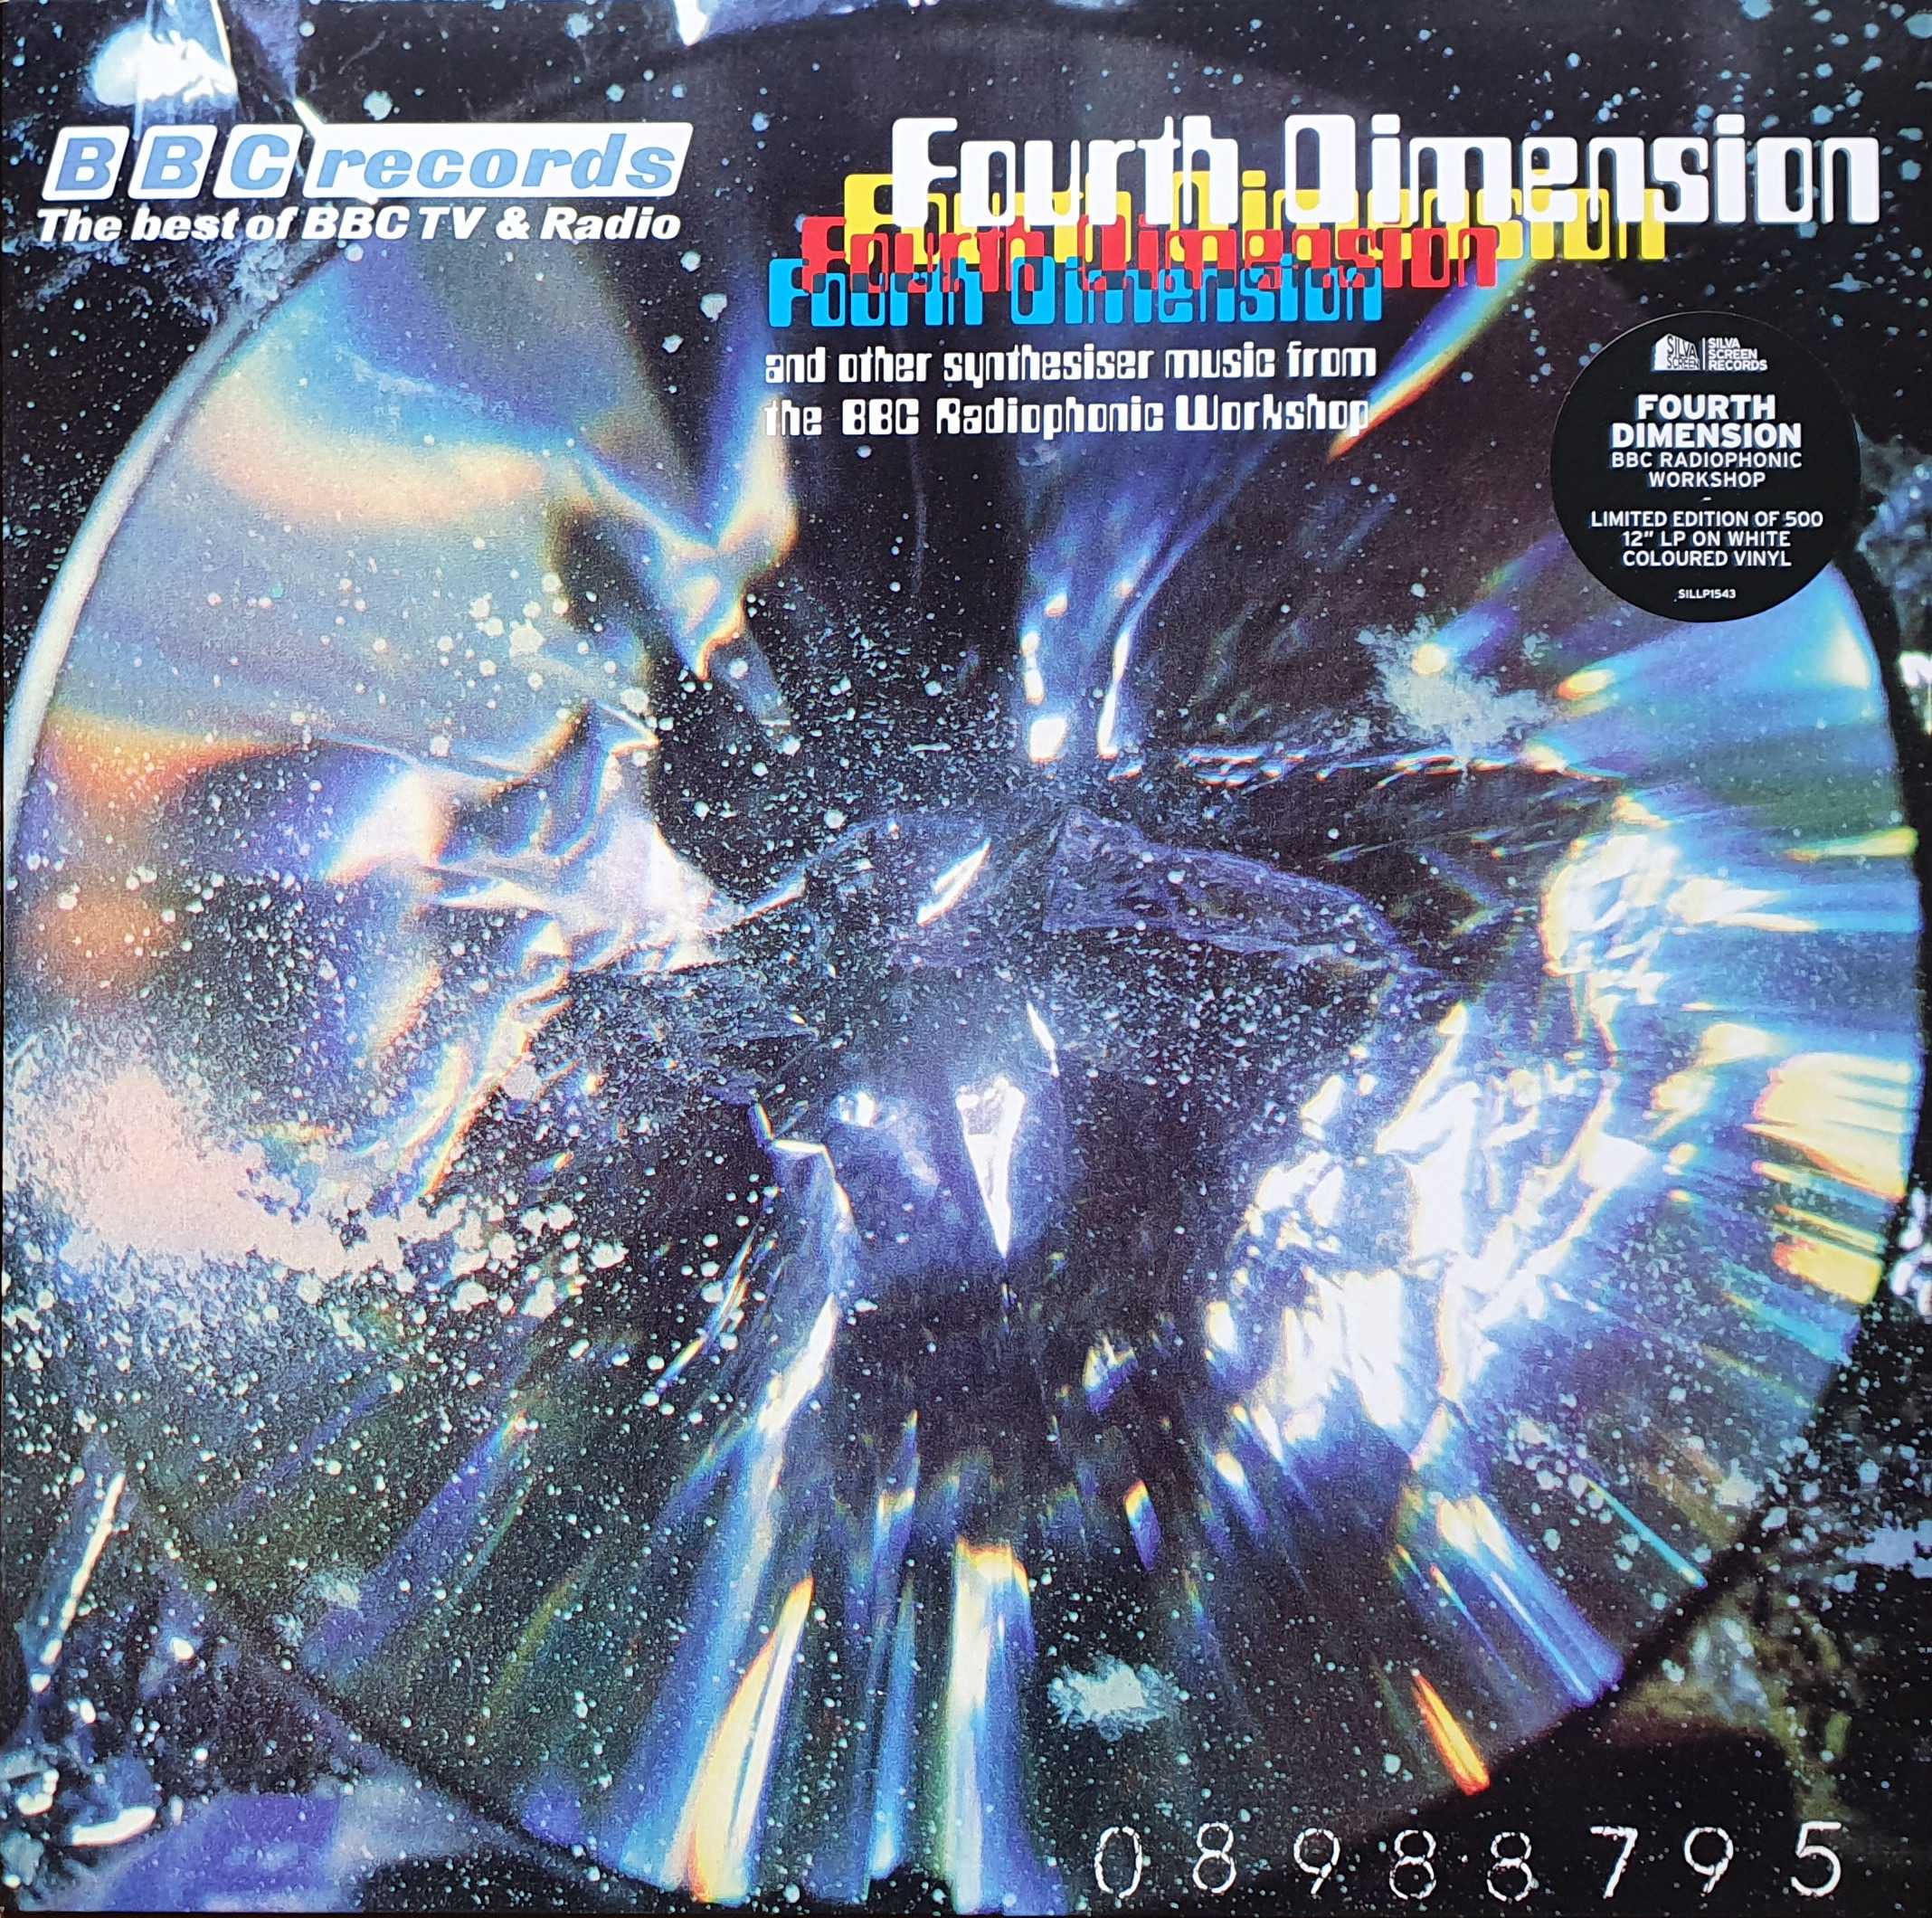 Picture of The fourth dimension by artist Paddy Kingsland / BBC Radiophonic Workshop from the BBC albums - Records and Tapes library